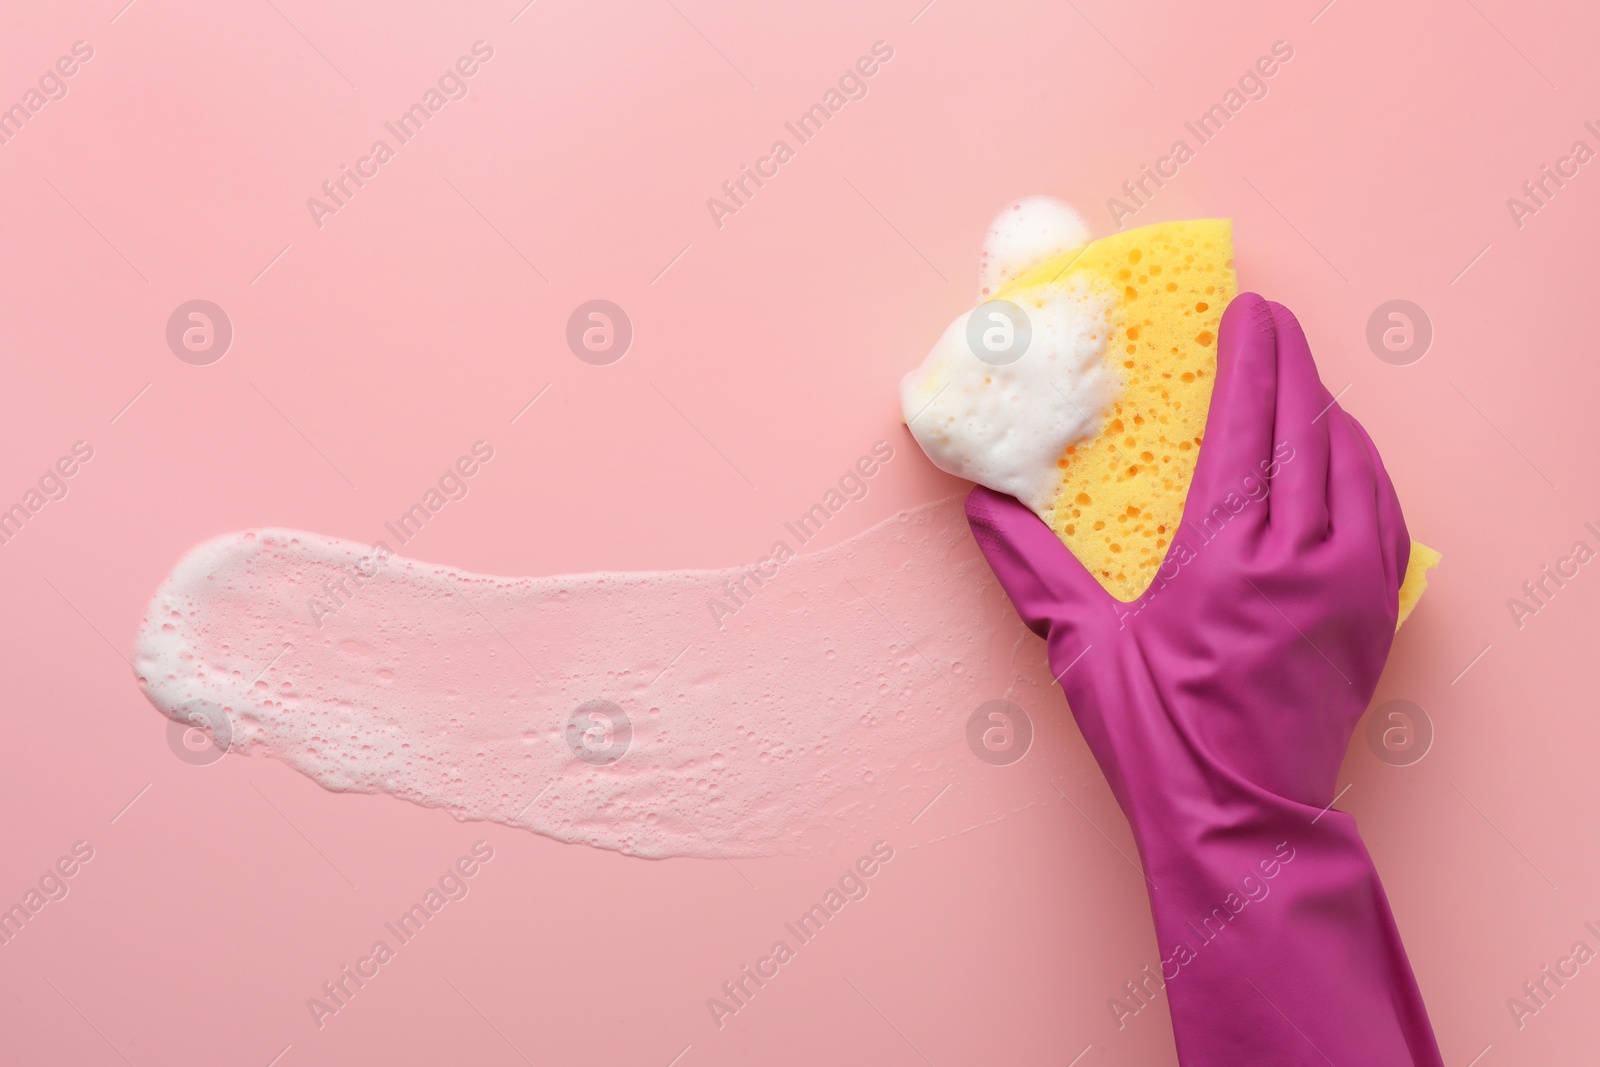 Photo of Cleaner in rubber glove holding sponge with foam on pink background, top view.